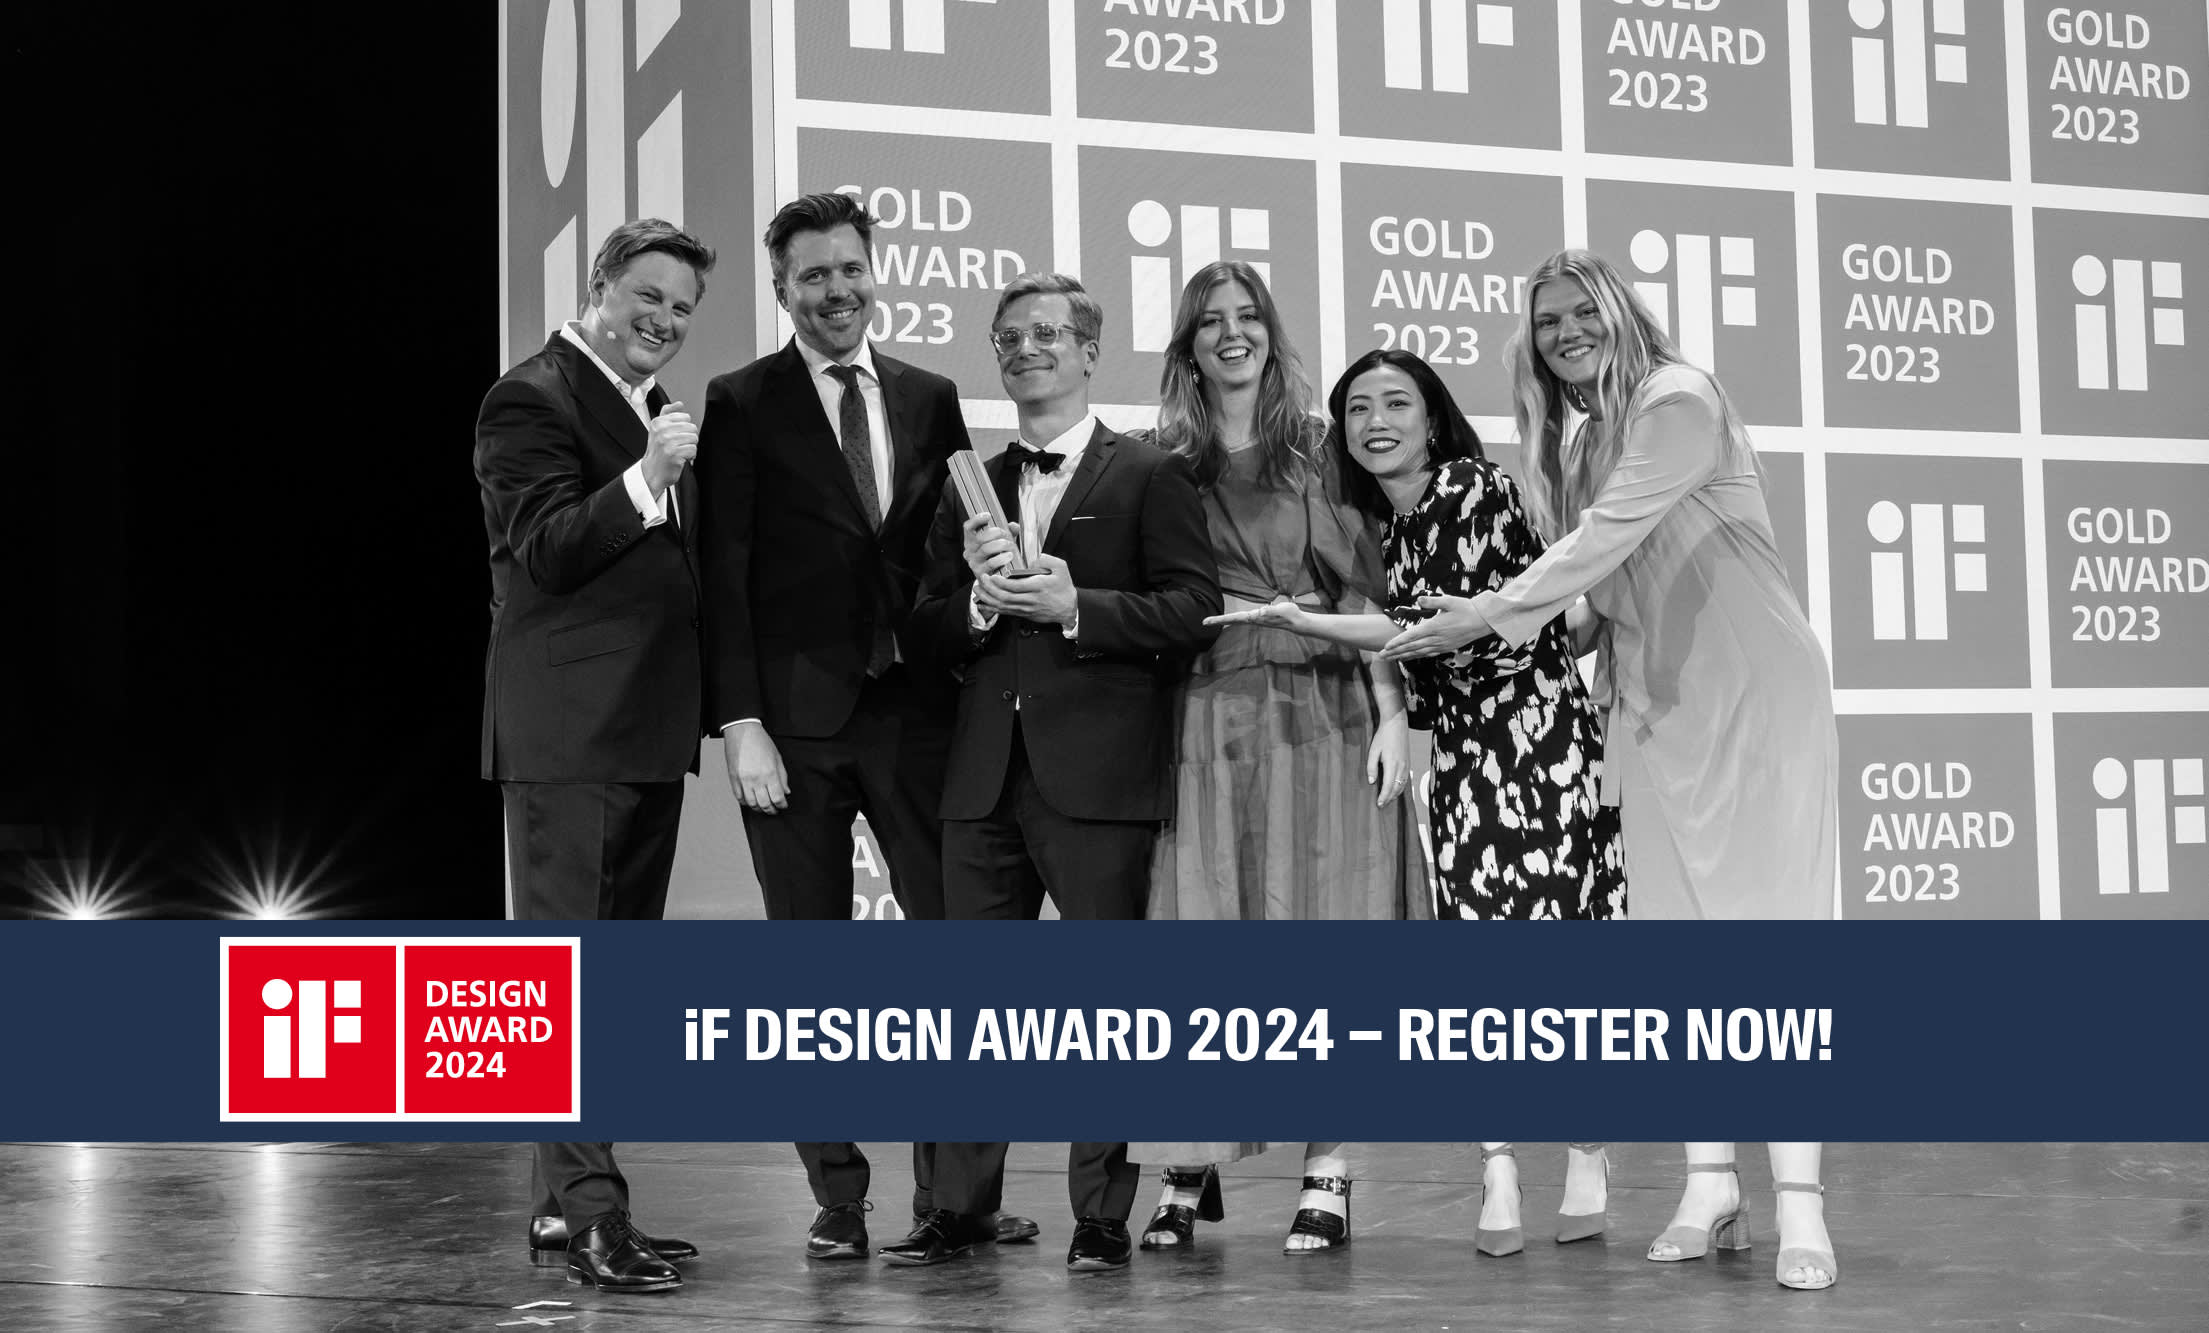 Award Winners celebrating the iF Design Award 2023 Gold by presenting their trophy